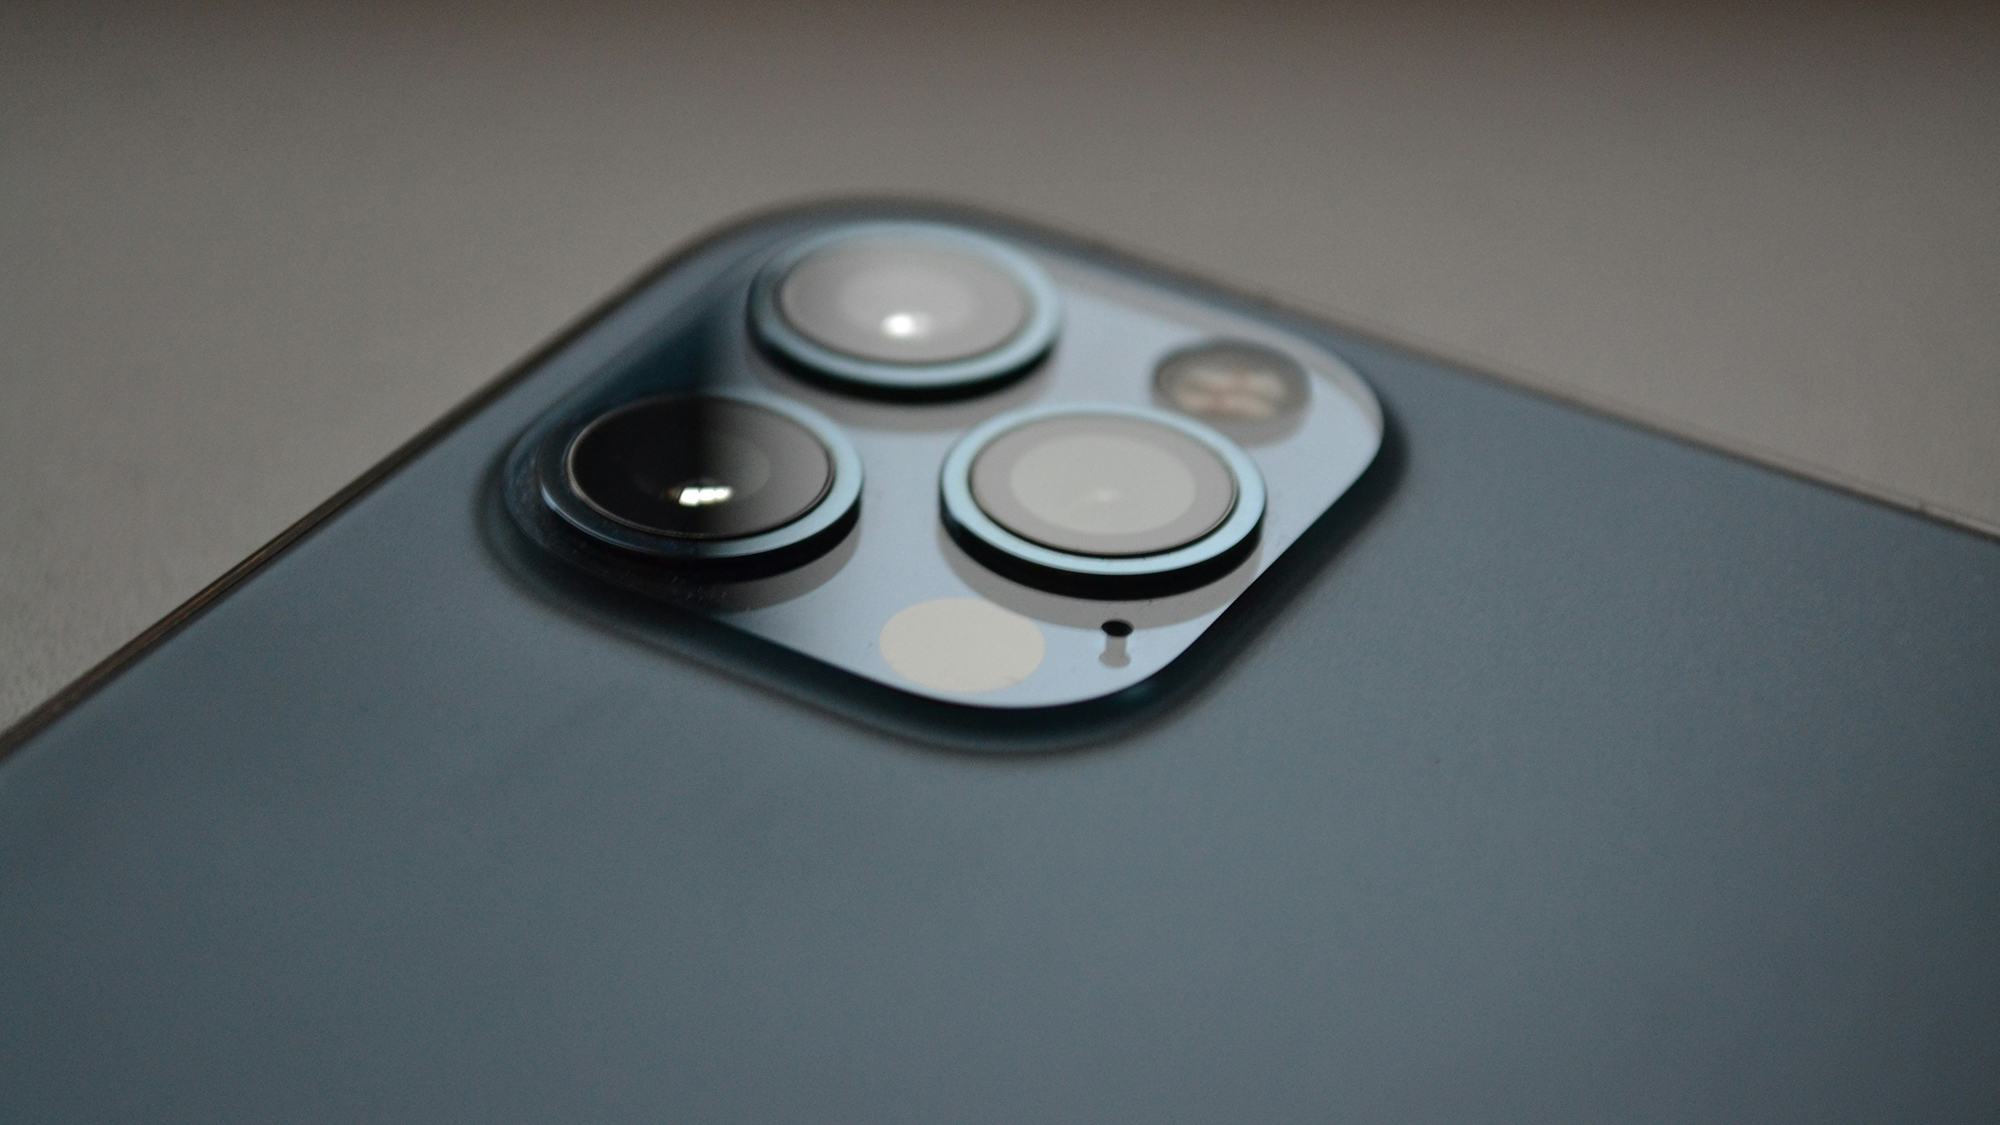 Do you know about all of the options you've got for mobile photo taking?